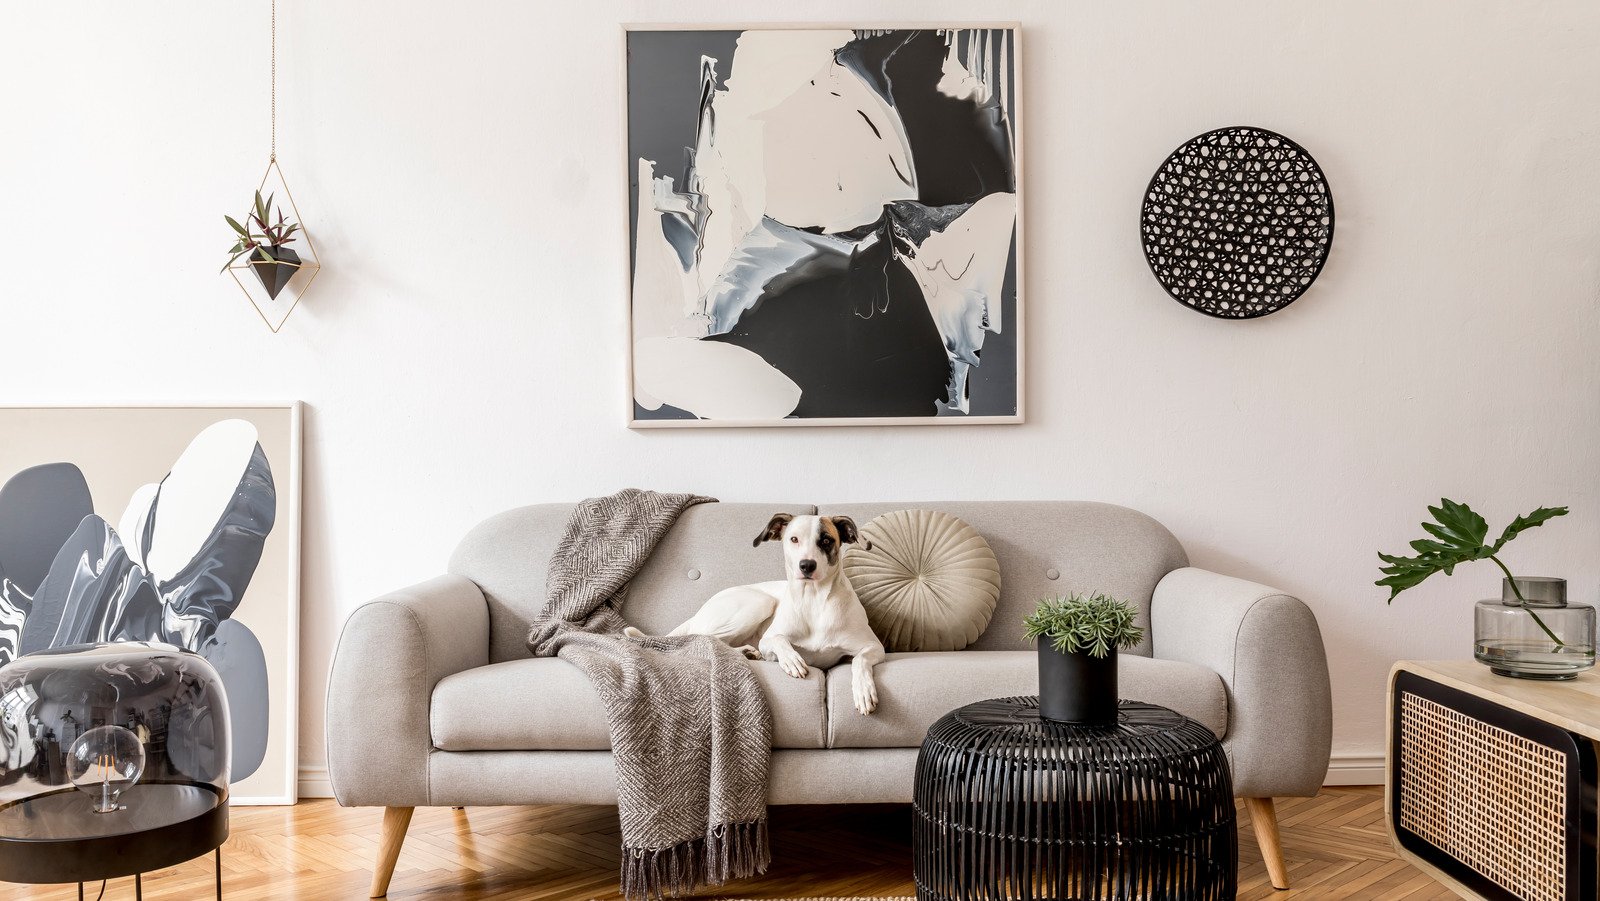 15 Easy Tips For Choosing The Perfect Artwork For Your Home